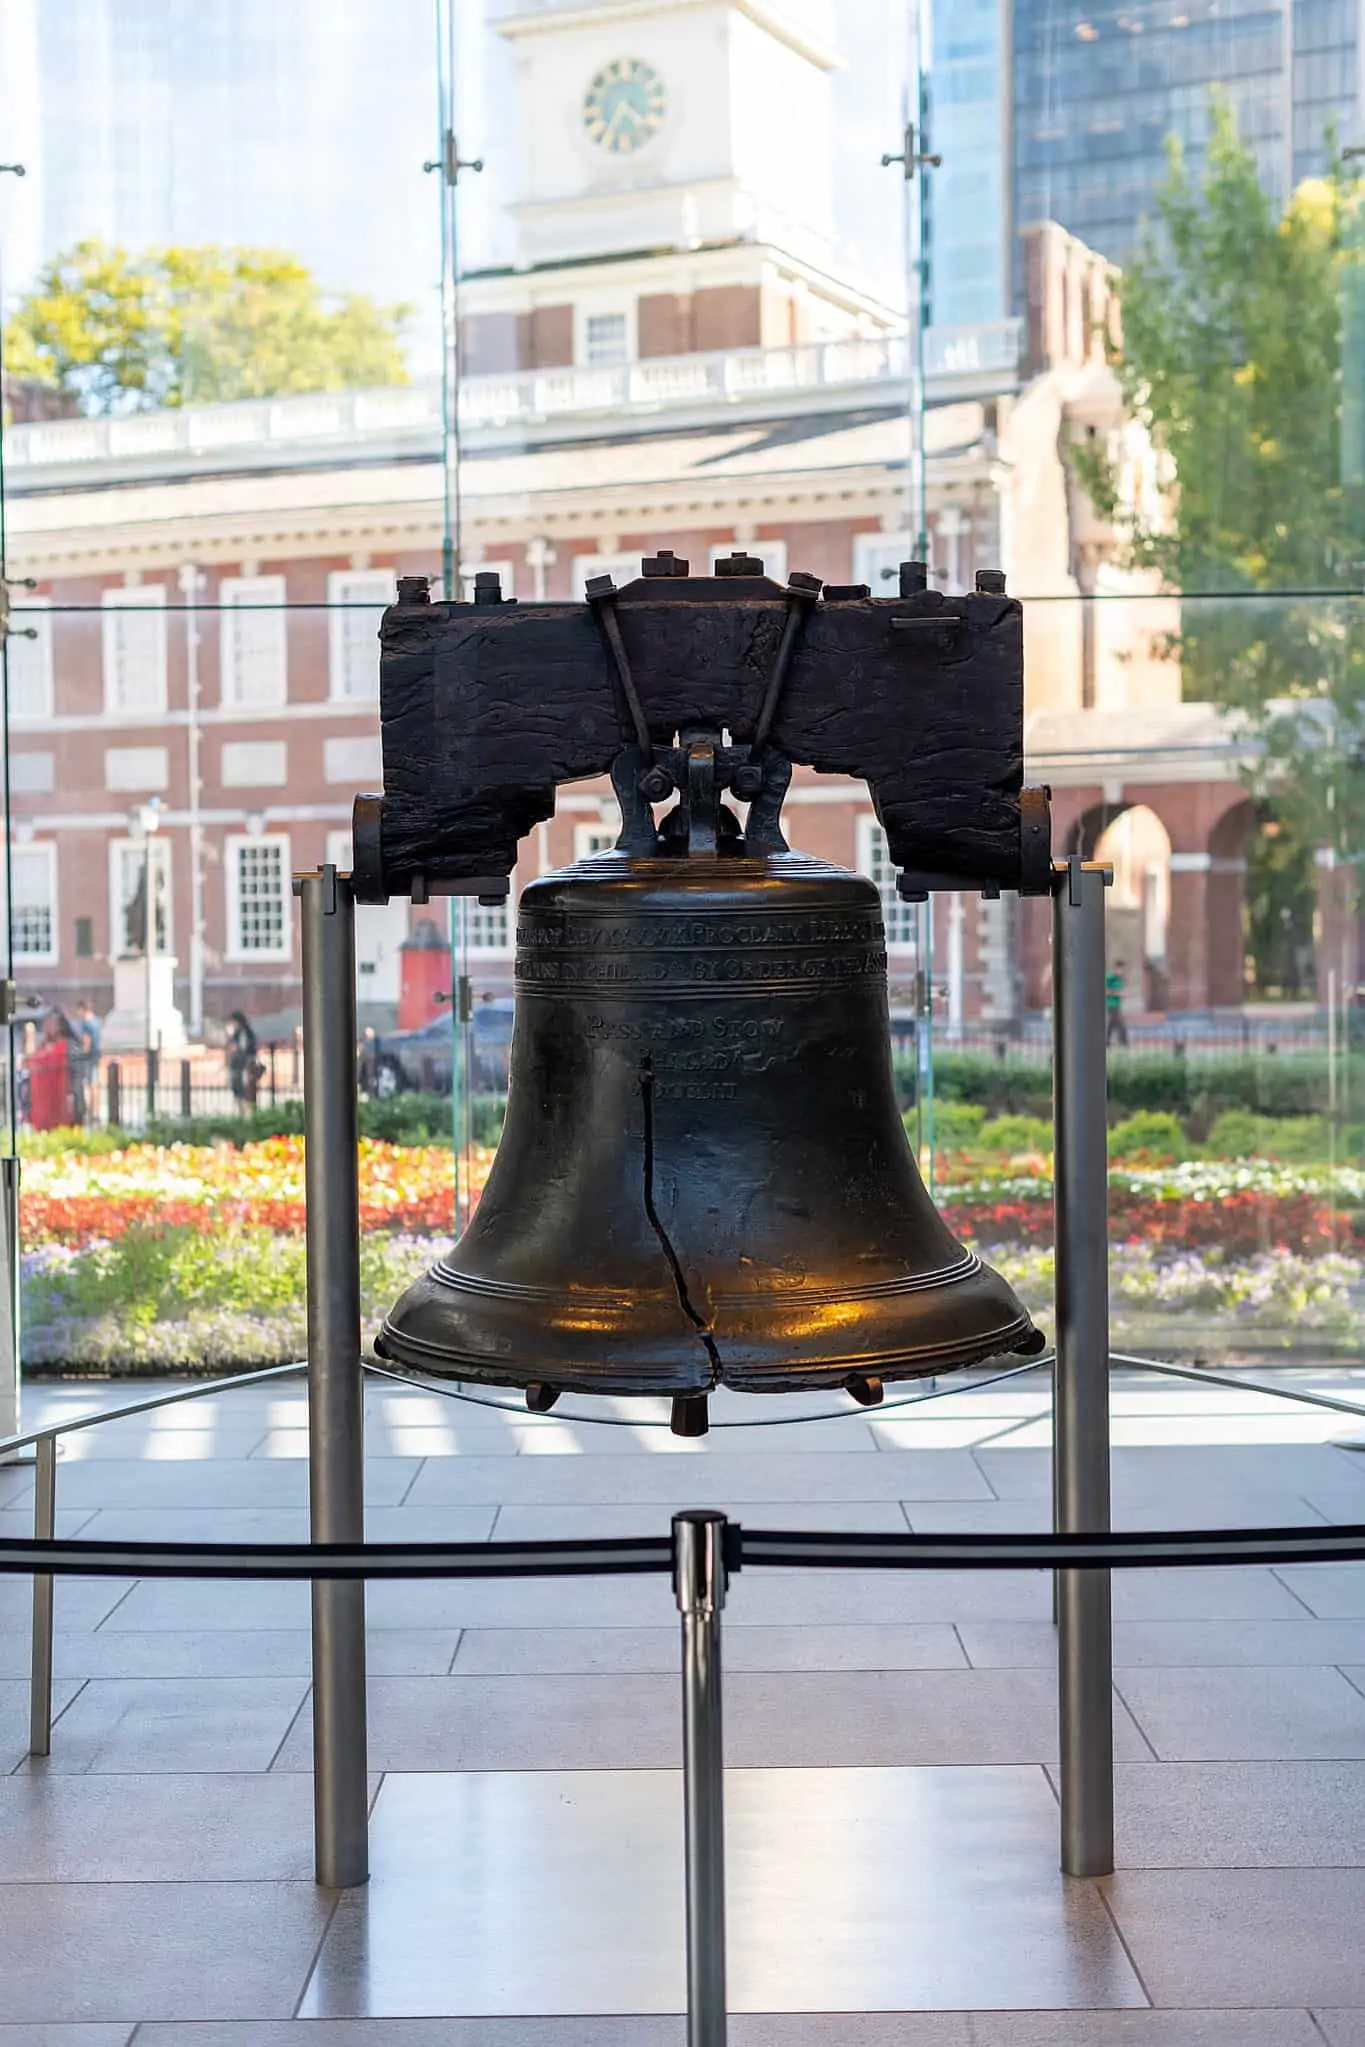 The Grand Experiment Liberty Bell https://commons.wikimedia.org/w/index.php?search=liberty+bell&title=Special:MediaSearch&go=Go&type=image&haslicense=attribution-same-license